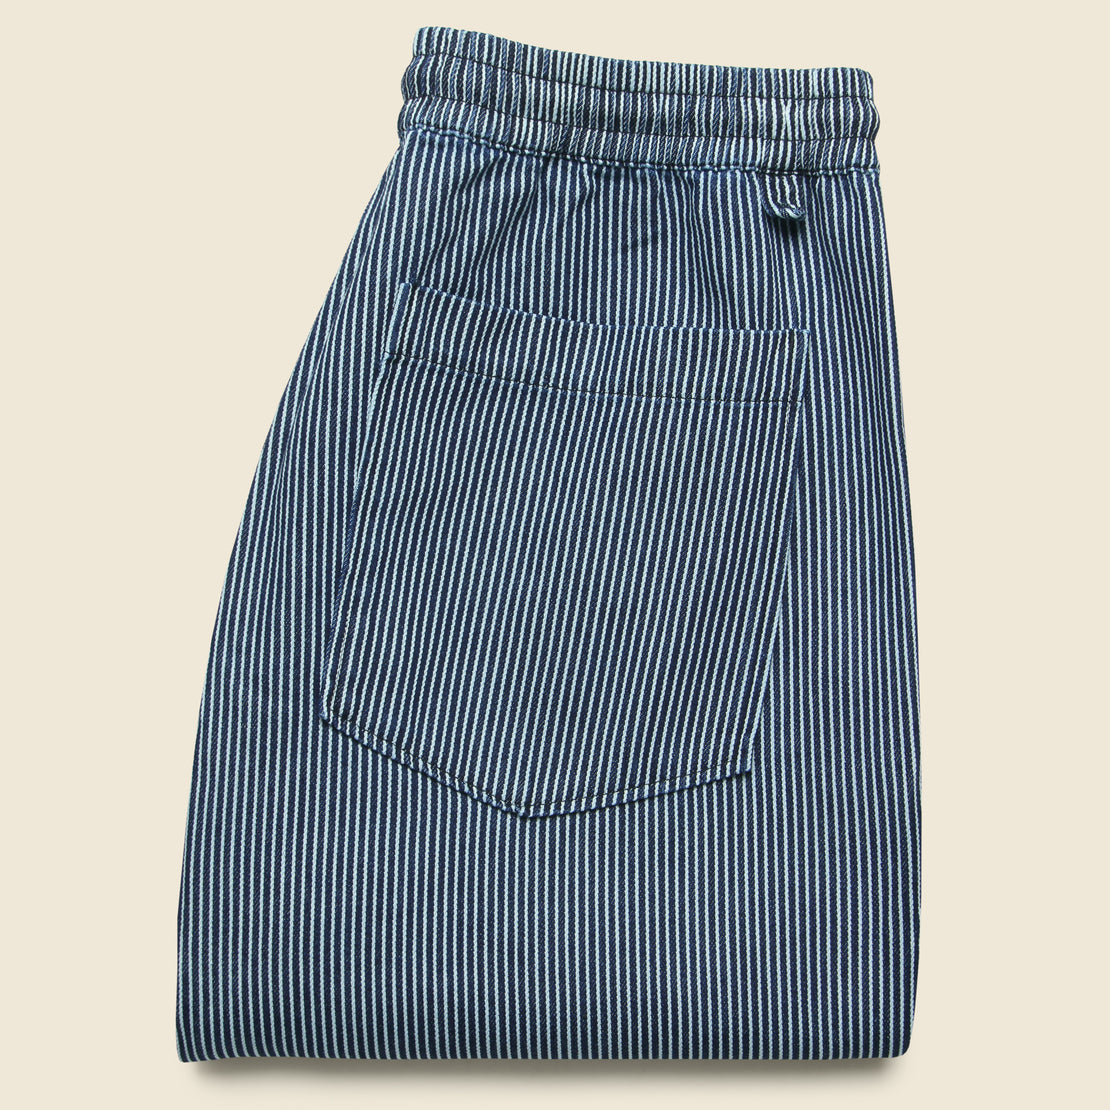 Hi-Water Trouser - Hickory Stripe Indigo - Universal Works - STAG Provisions - Pants - Twill